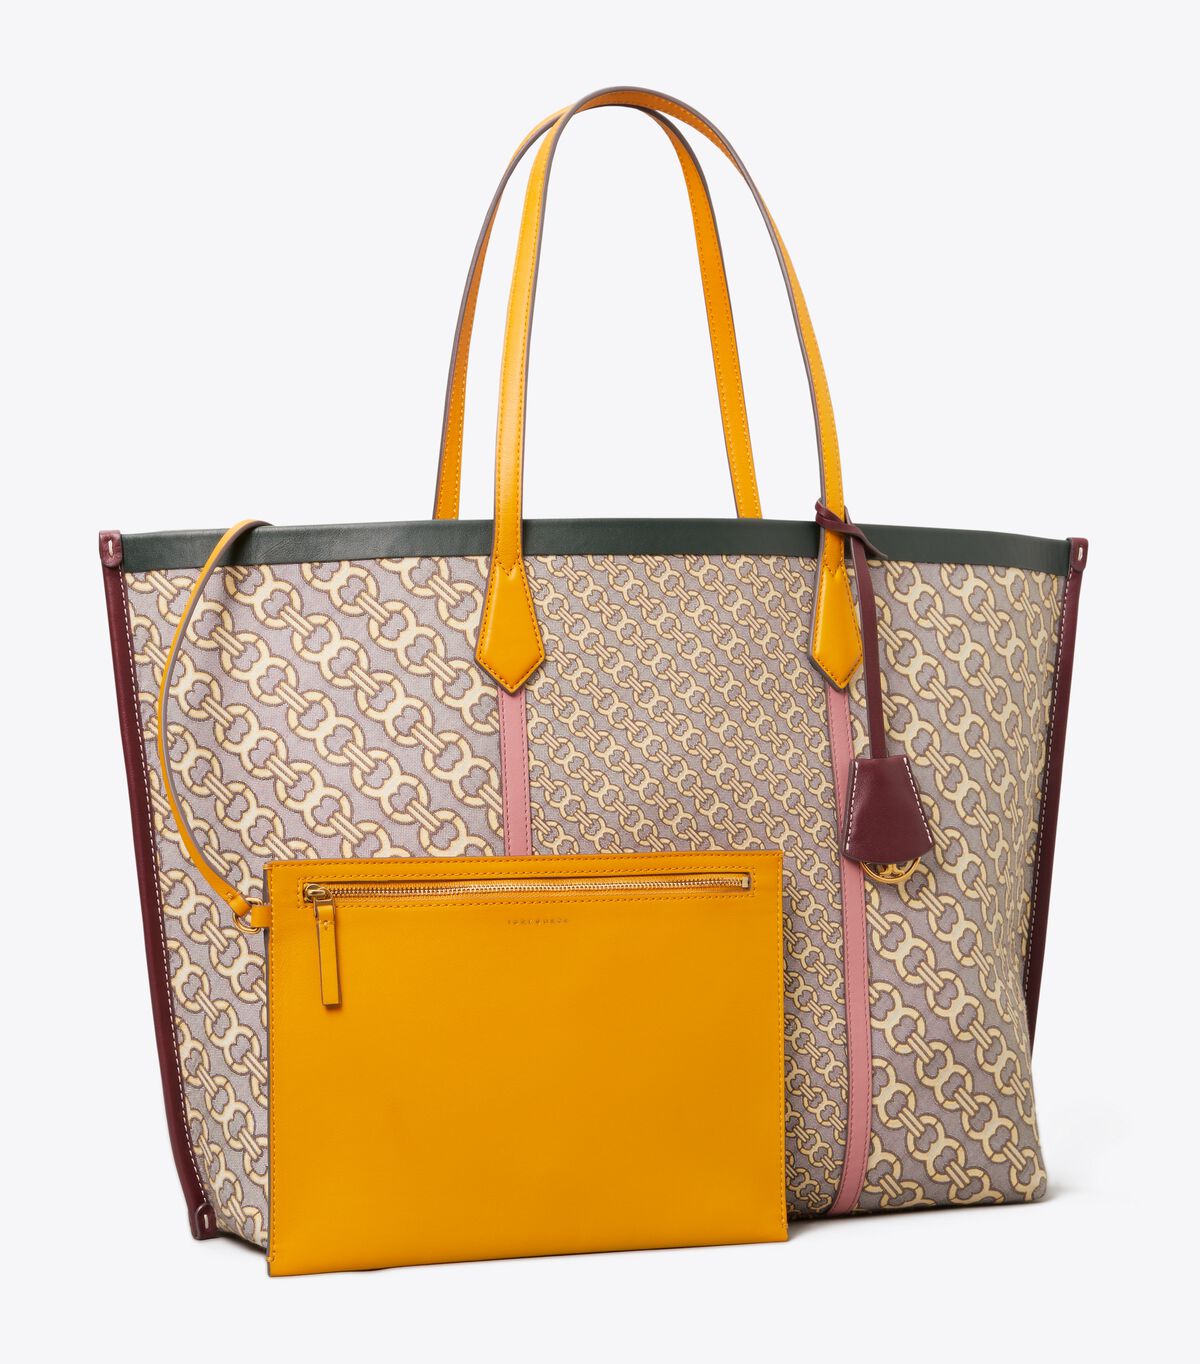 Perry Jacquard Oversized Tote